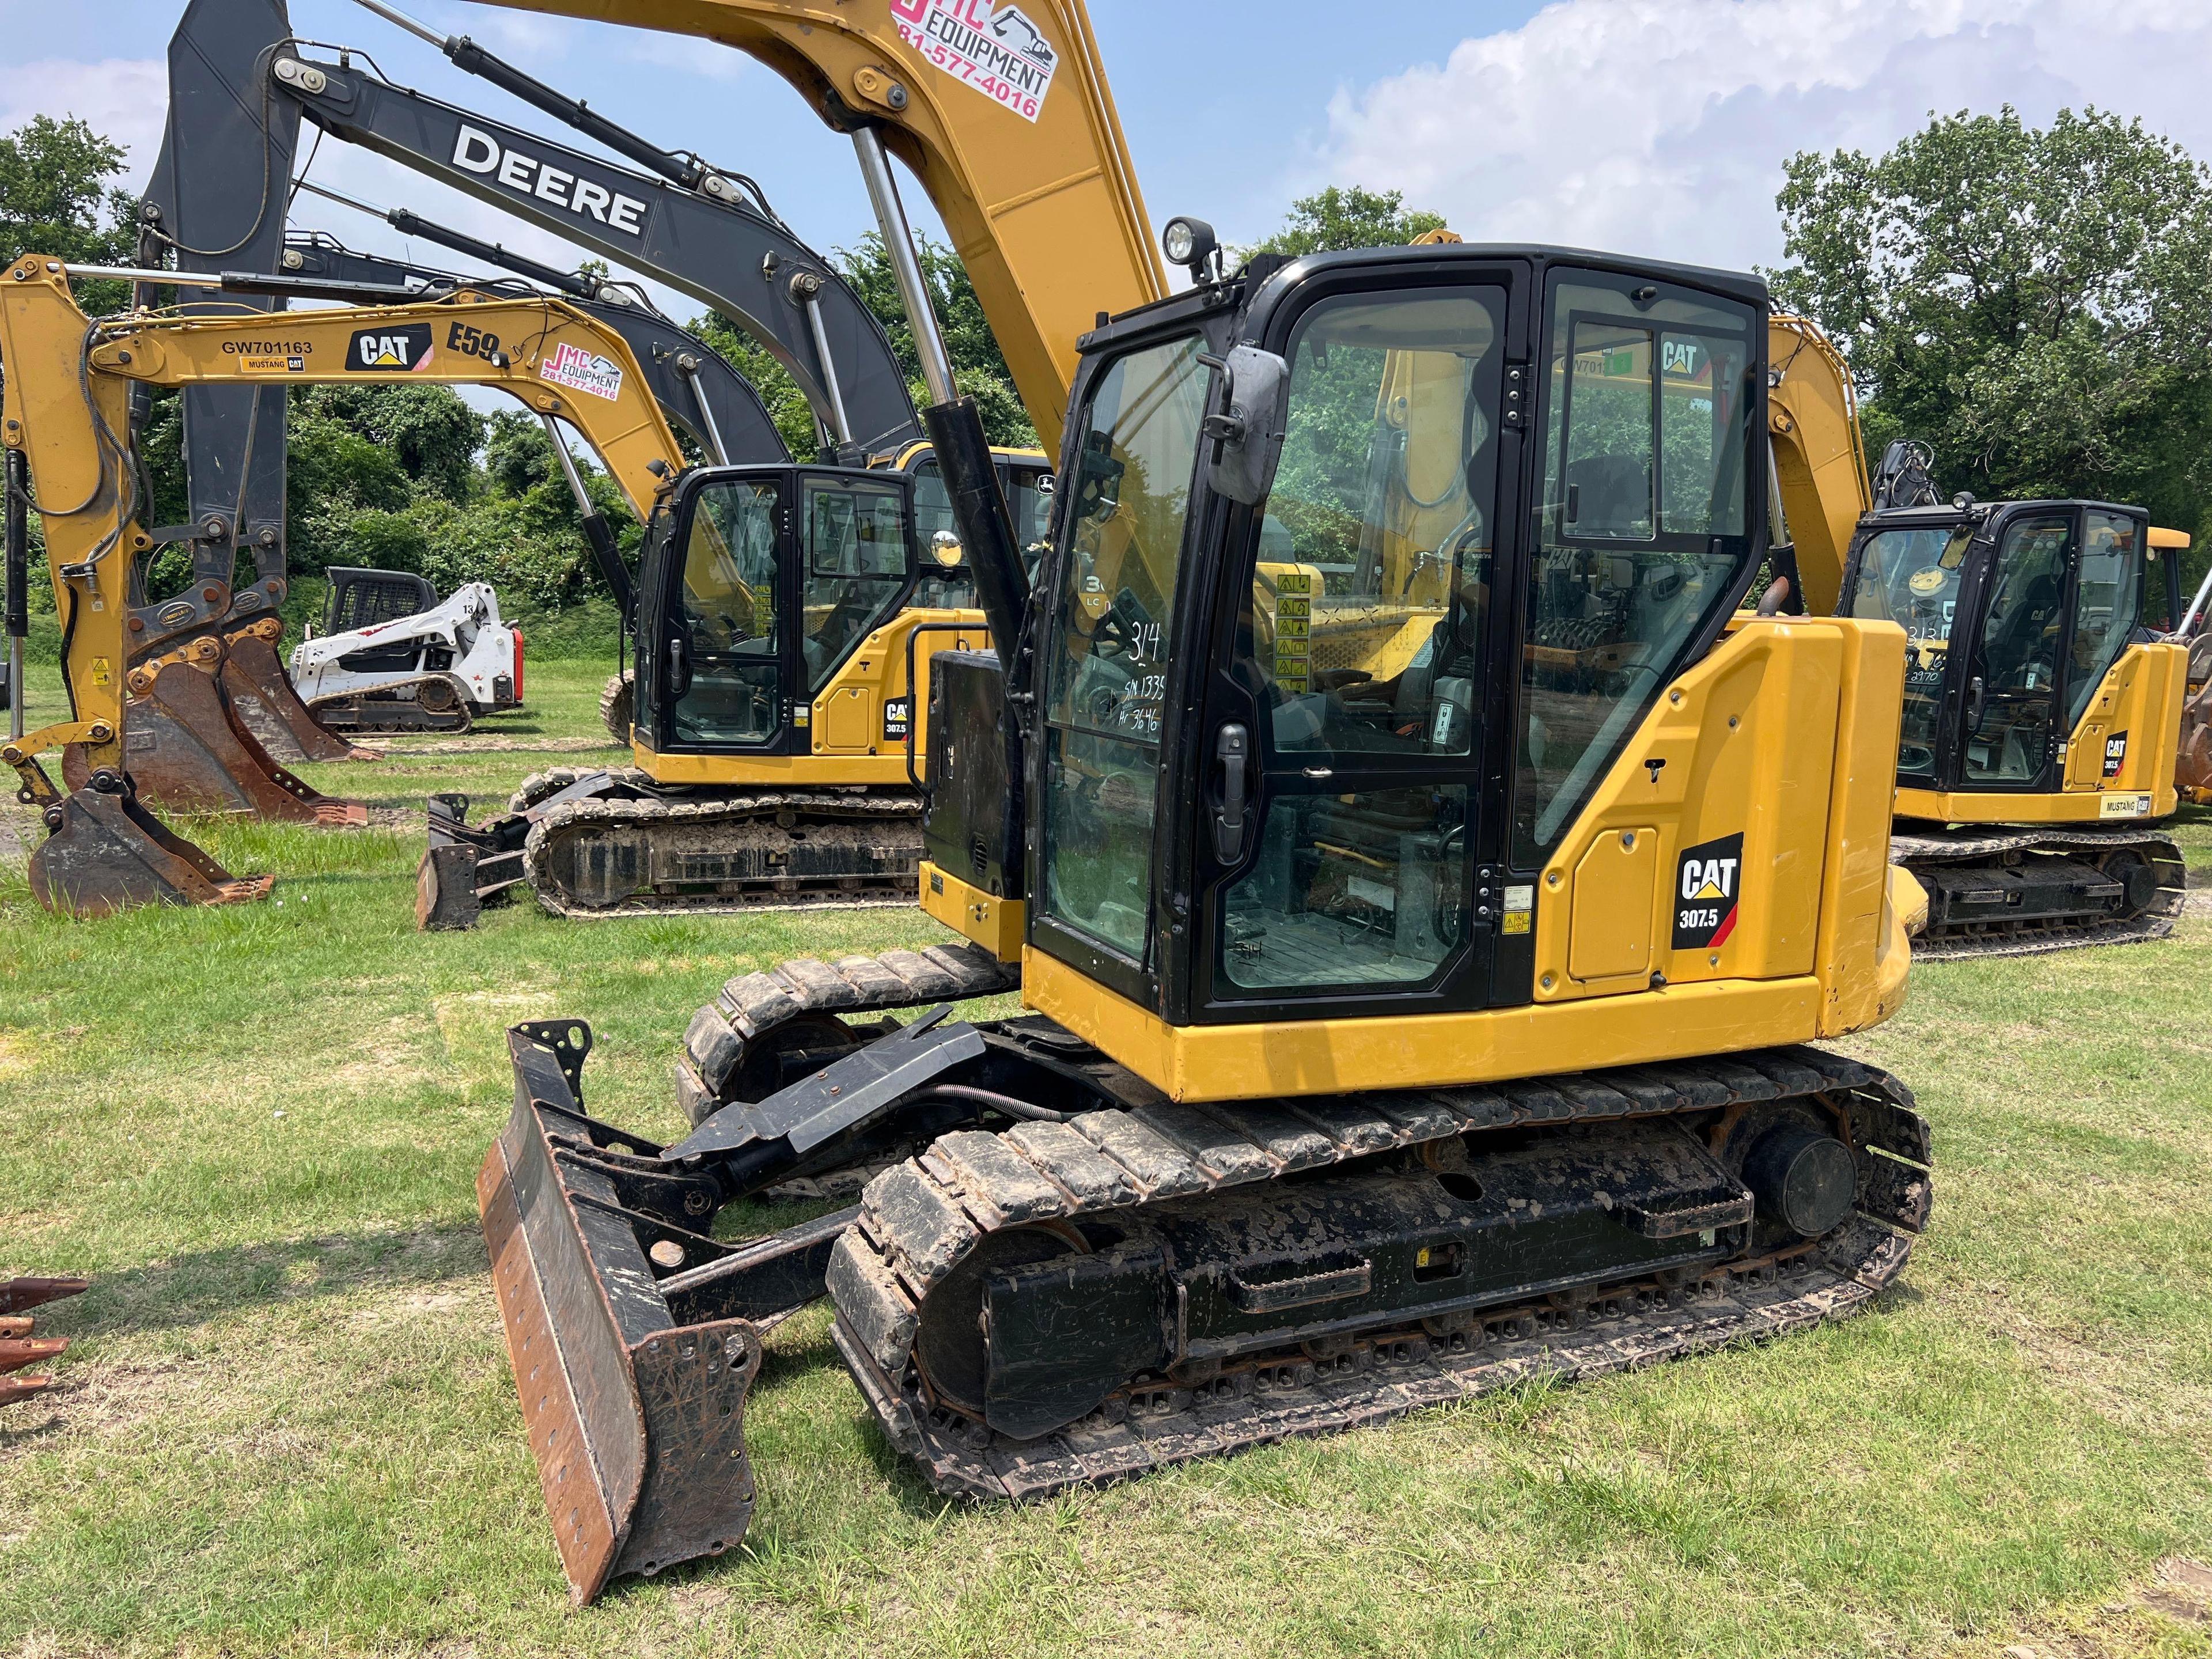 2019 CAT 307.5 HYDRAULIC EXCAVATOR SN:GW701335 powered by Cat diesel engine, equipped with Cab, air,